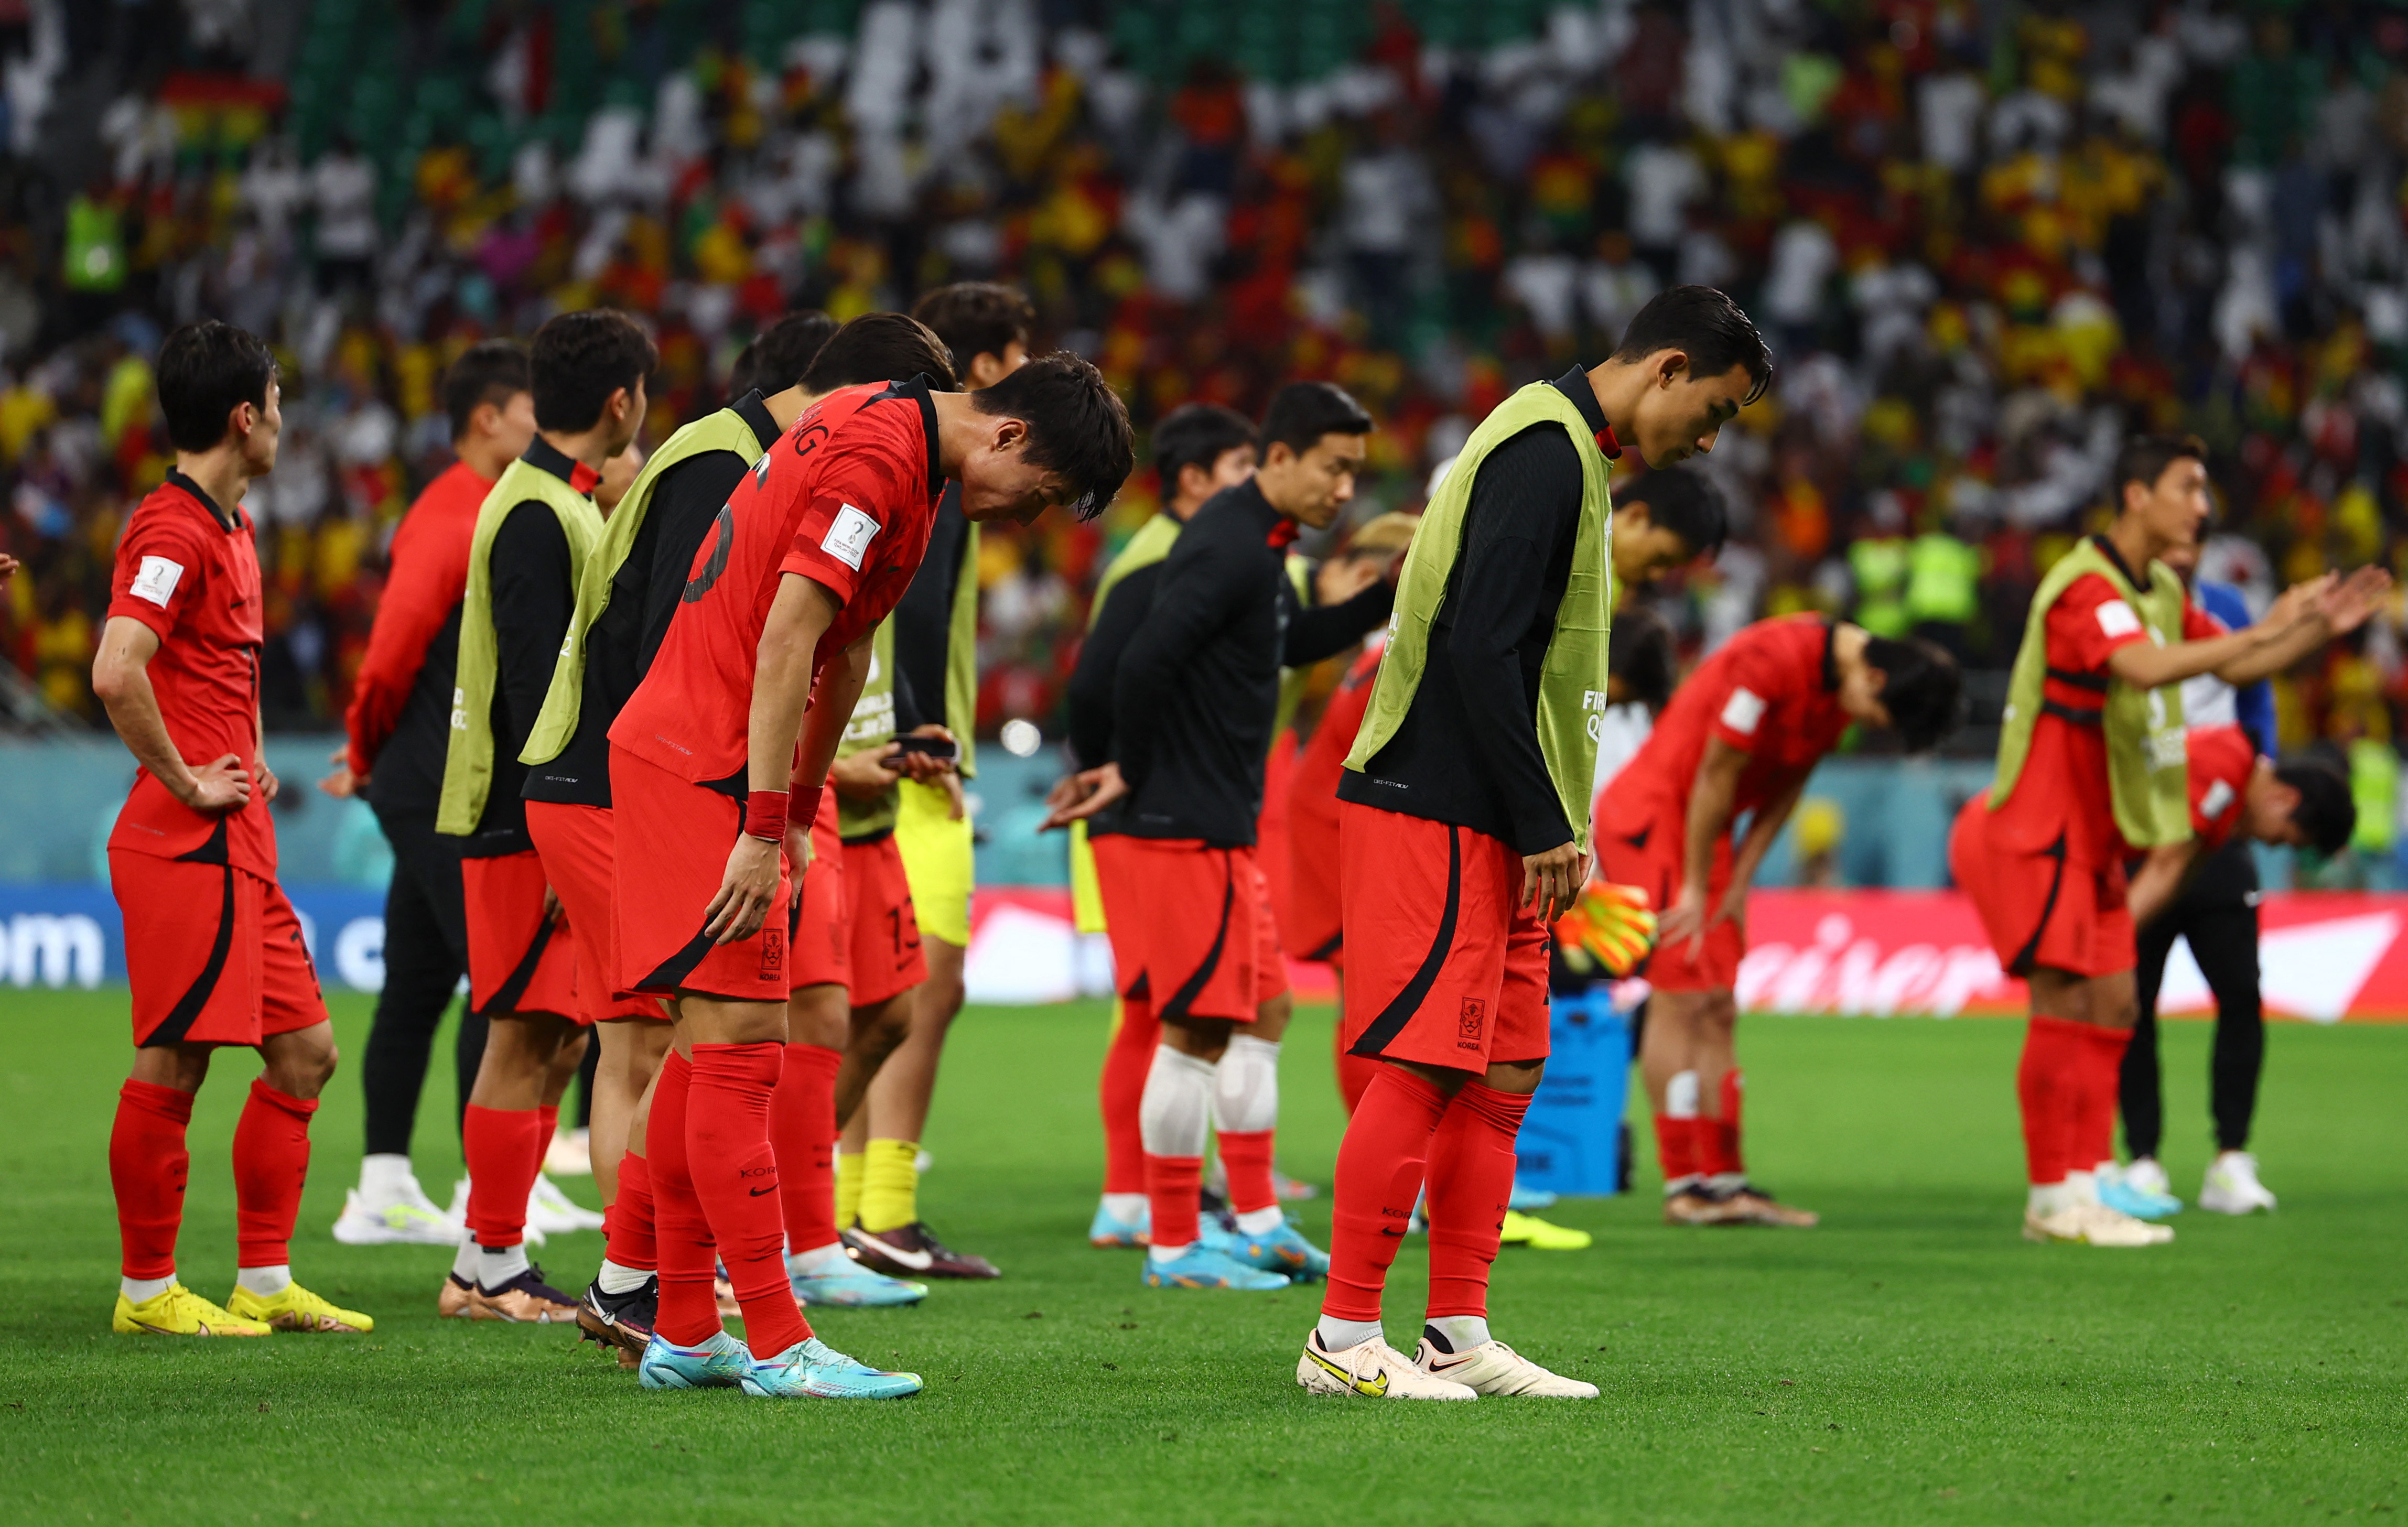 Loss to Ghana 'totally unfair' - South Korea assistant coach | Reuters